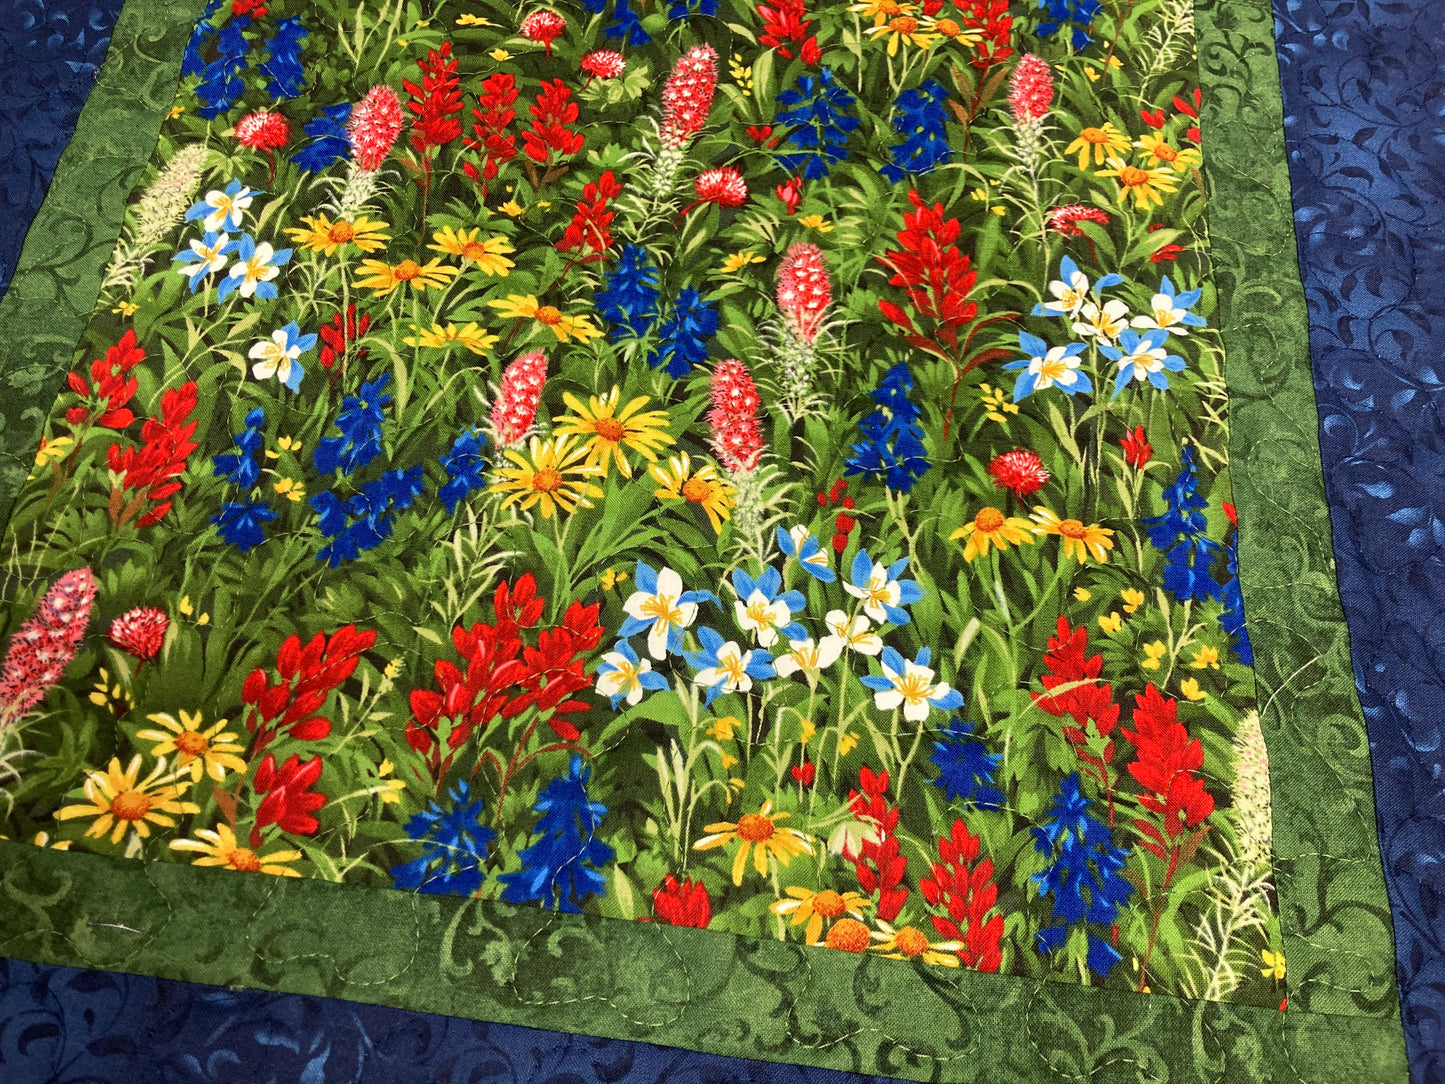 Texas Wildflower Quilted Table Topper, Reversible Table Mat, 20x20" Coffee Table End Table Nightstand, Large Square Summer Spring Decor